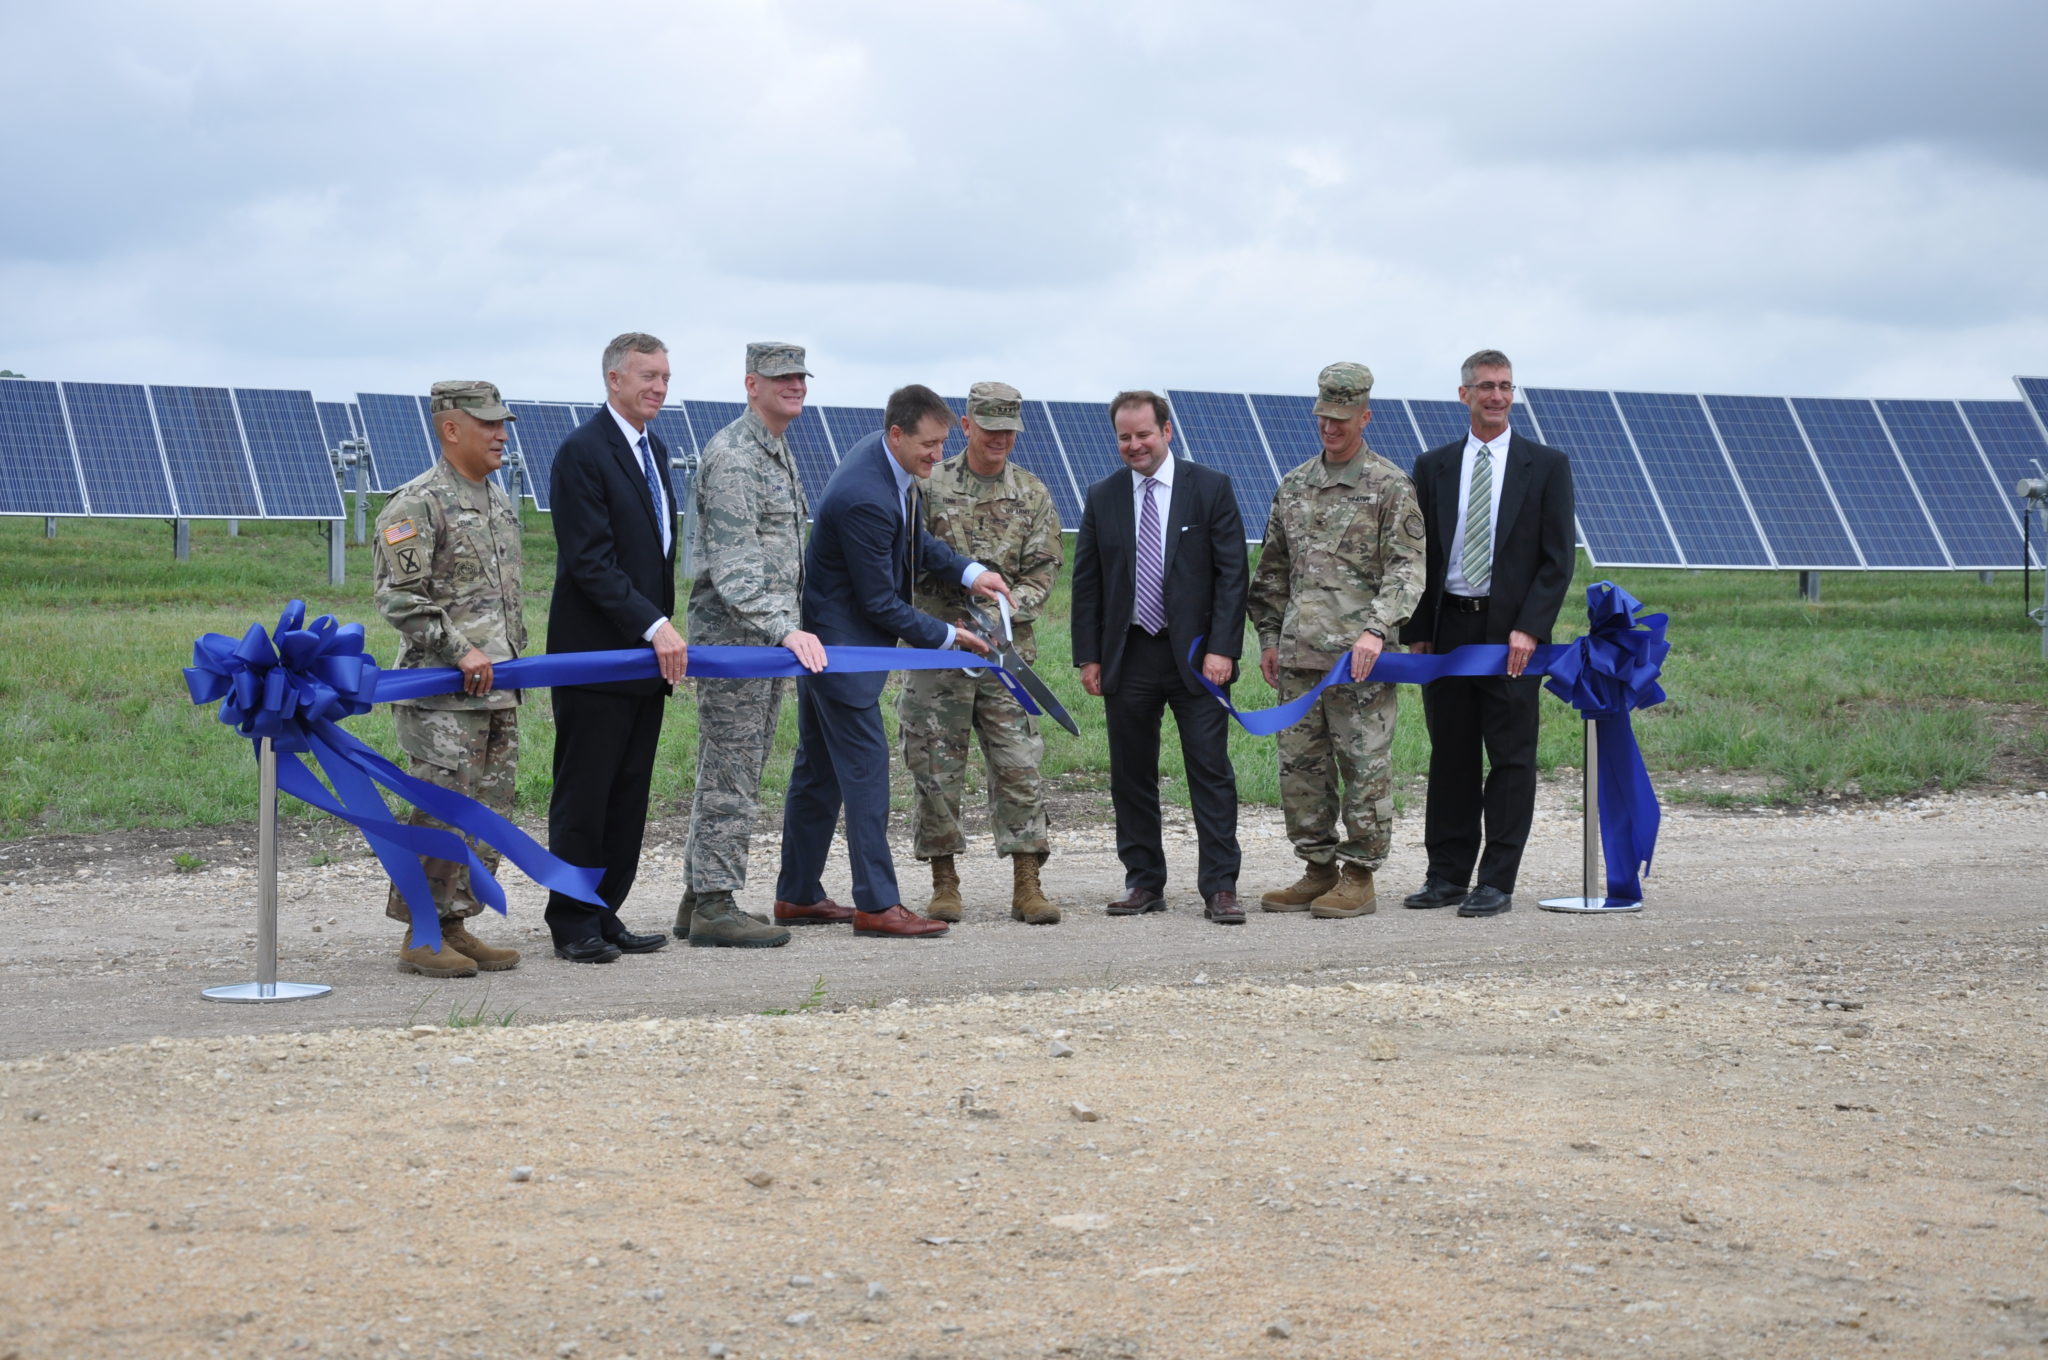 Apex CEO Mark Goodwin stands with senior military officials and civilian leaders to cut the ribbon for Phantom Solar and Cotton Plains Wind.